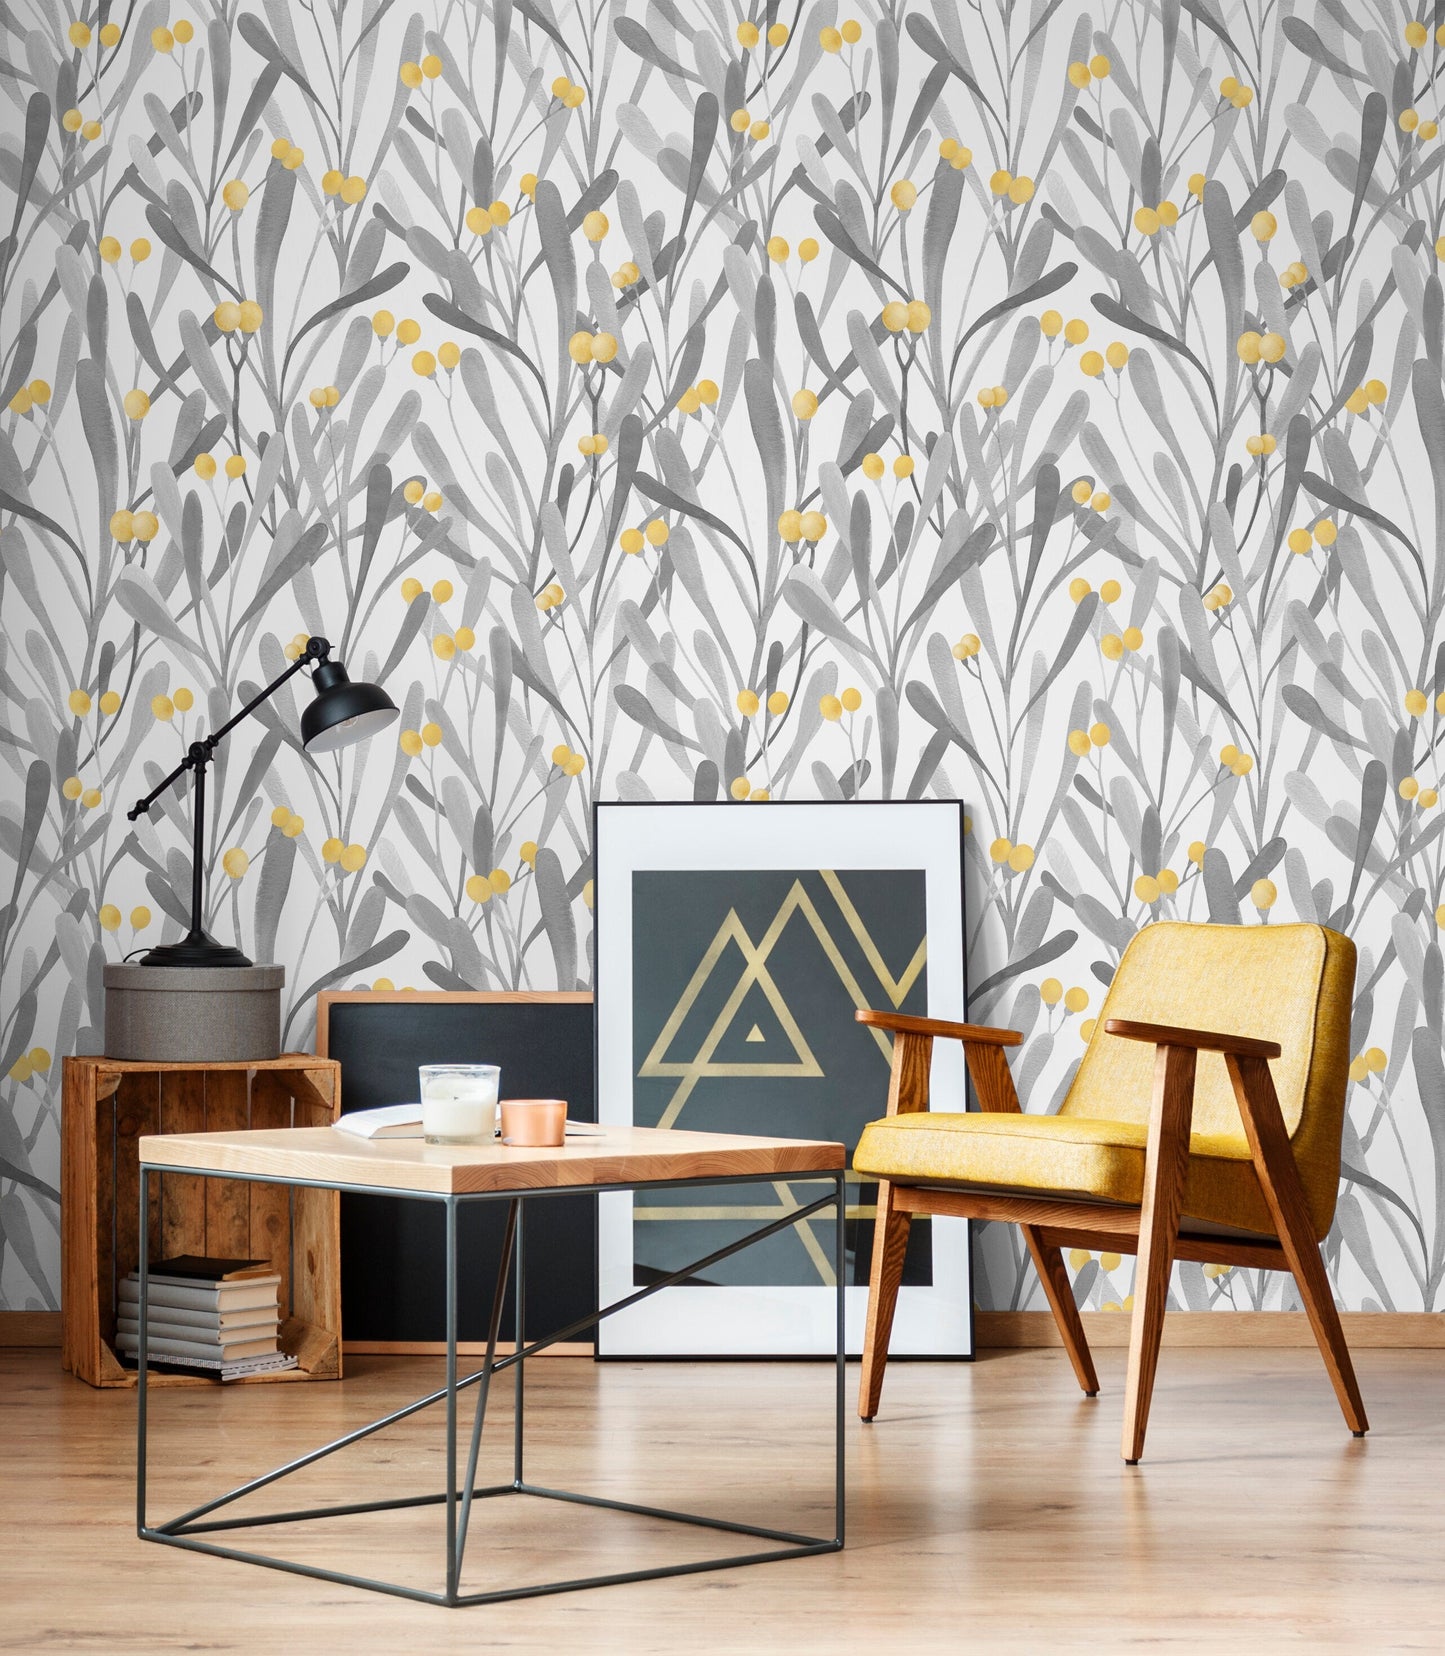 Removable Wallpaper, Temporary Wallpaper, Floral Wallpaper, Peel and Stick Wallpaper, Wall Paper, Boho - X062